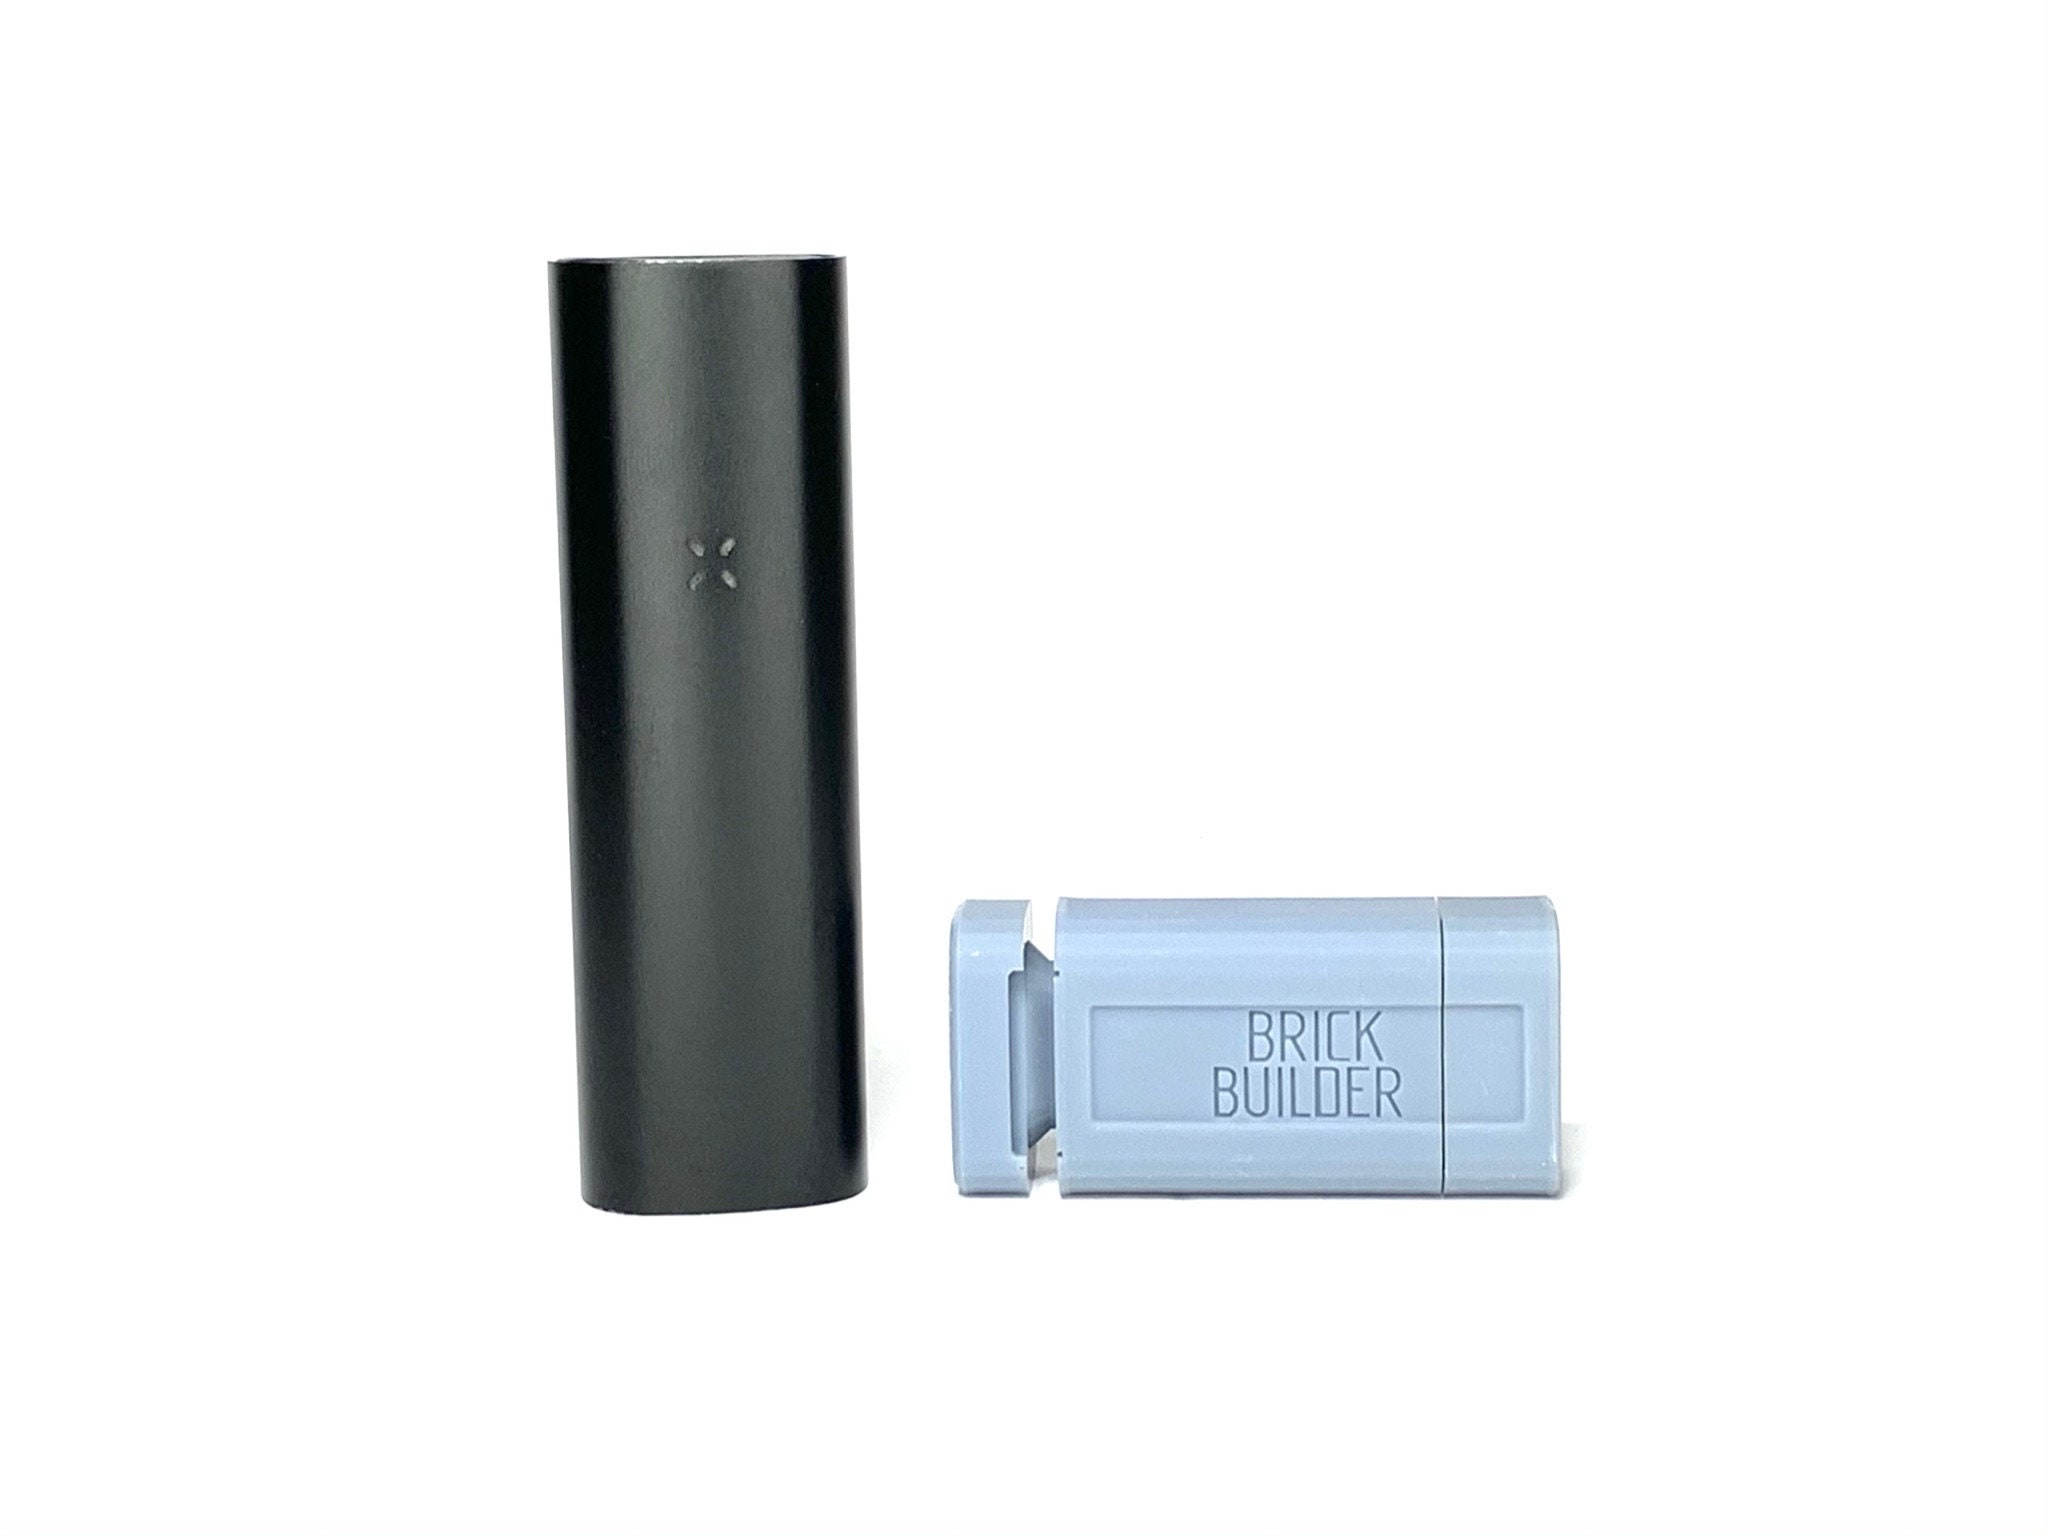 PAX Plus Vape  Available in Thailand & Malaysia 